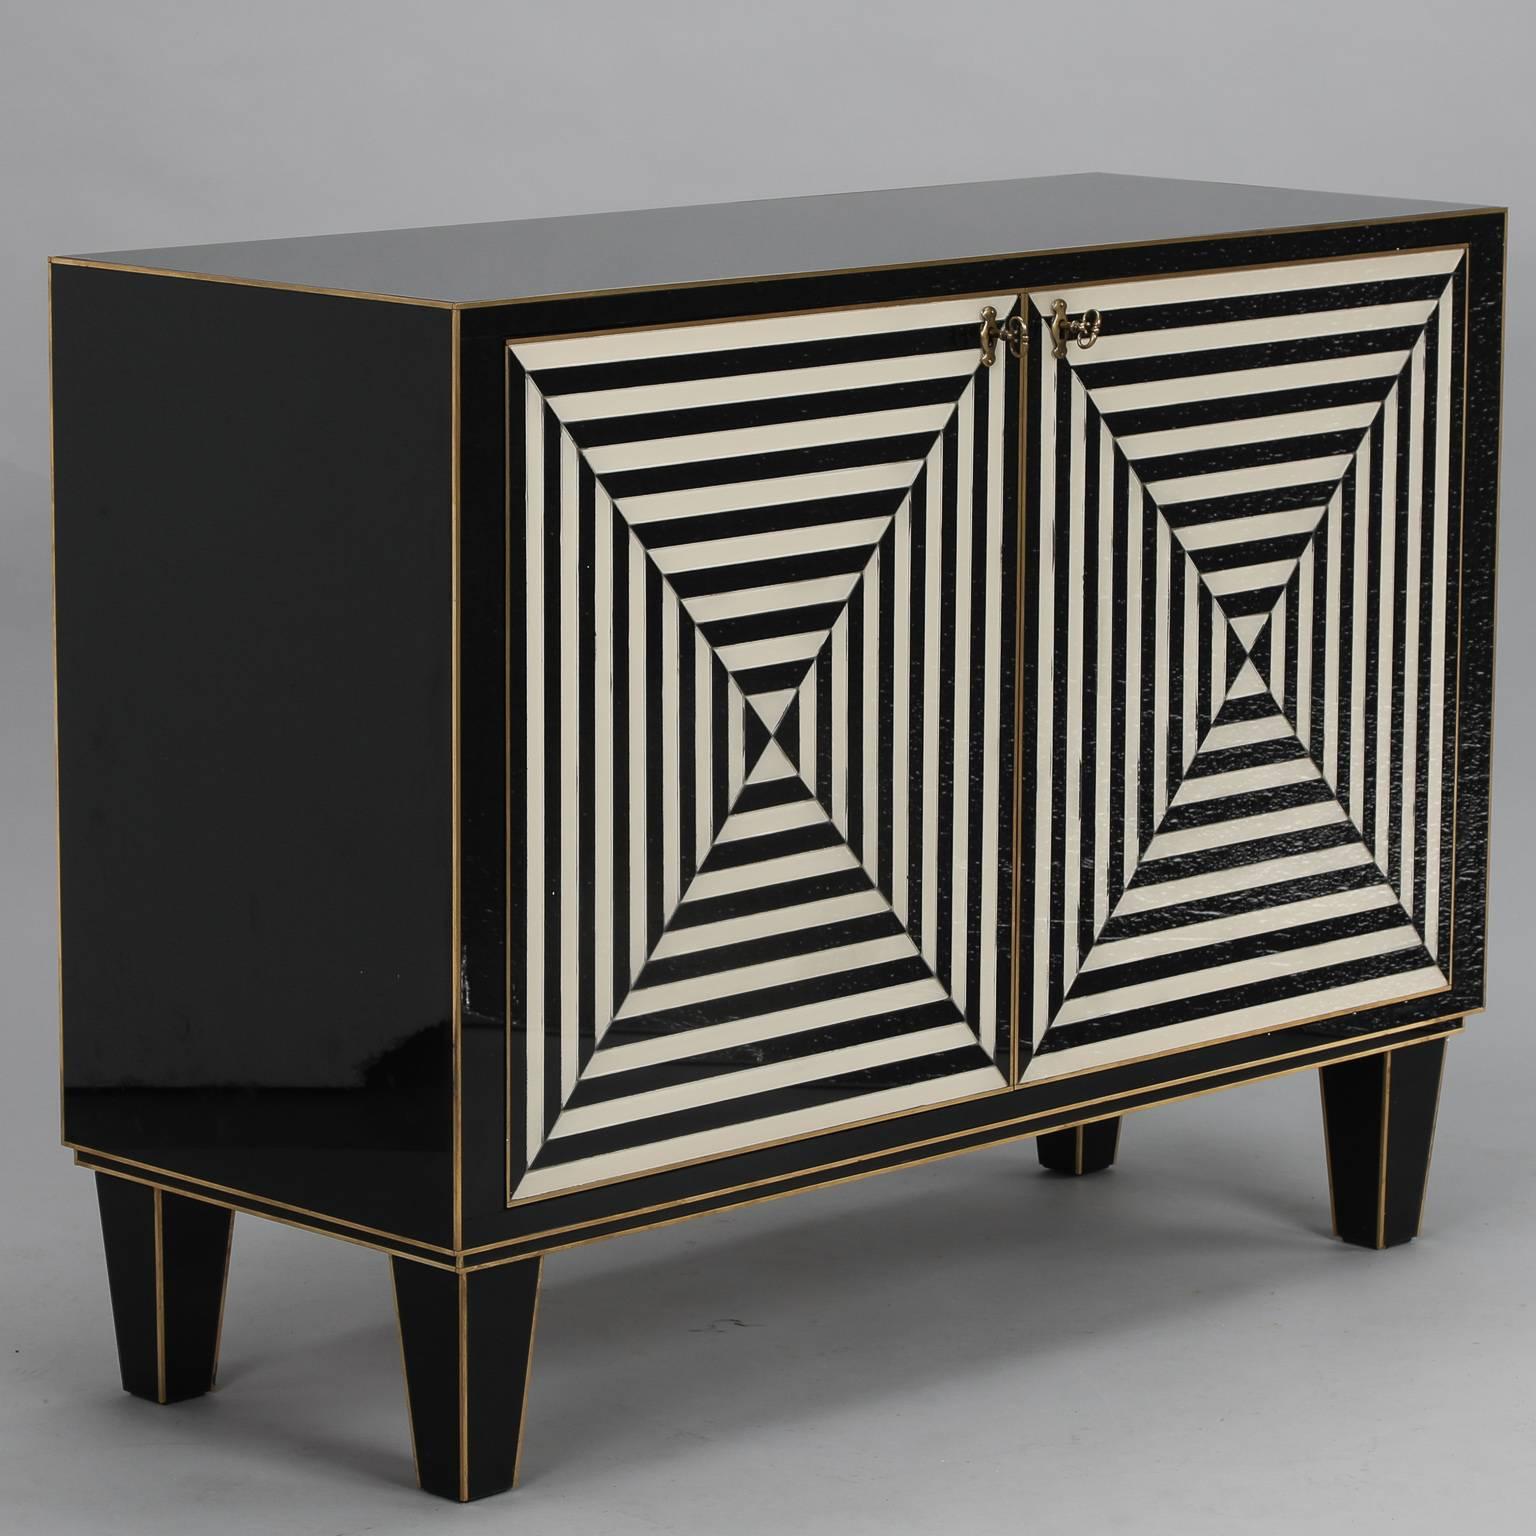 This Italian cabinet was made by a company in Padova, Italy in the late 1970s for a luxury hotel in Venice, Italy. The cabinet has a wood base with black and white Murano glass overlay panels and brass inlay and hardware. The front consists of two